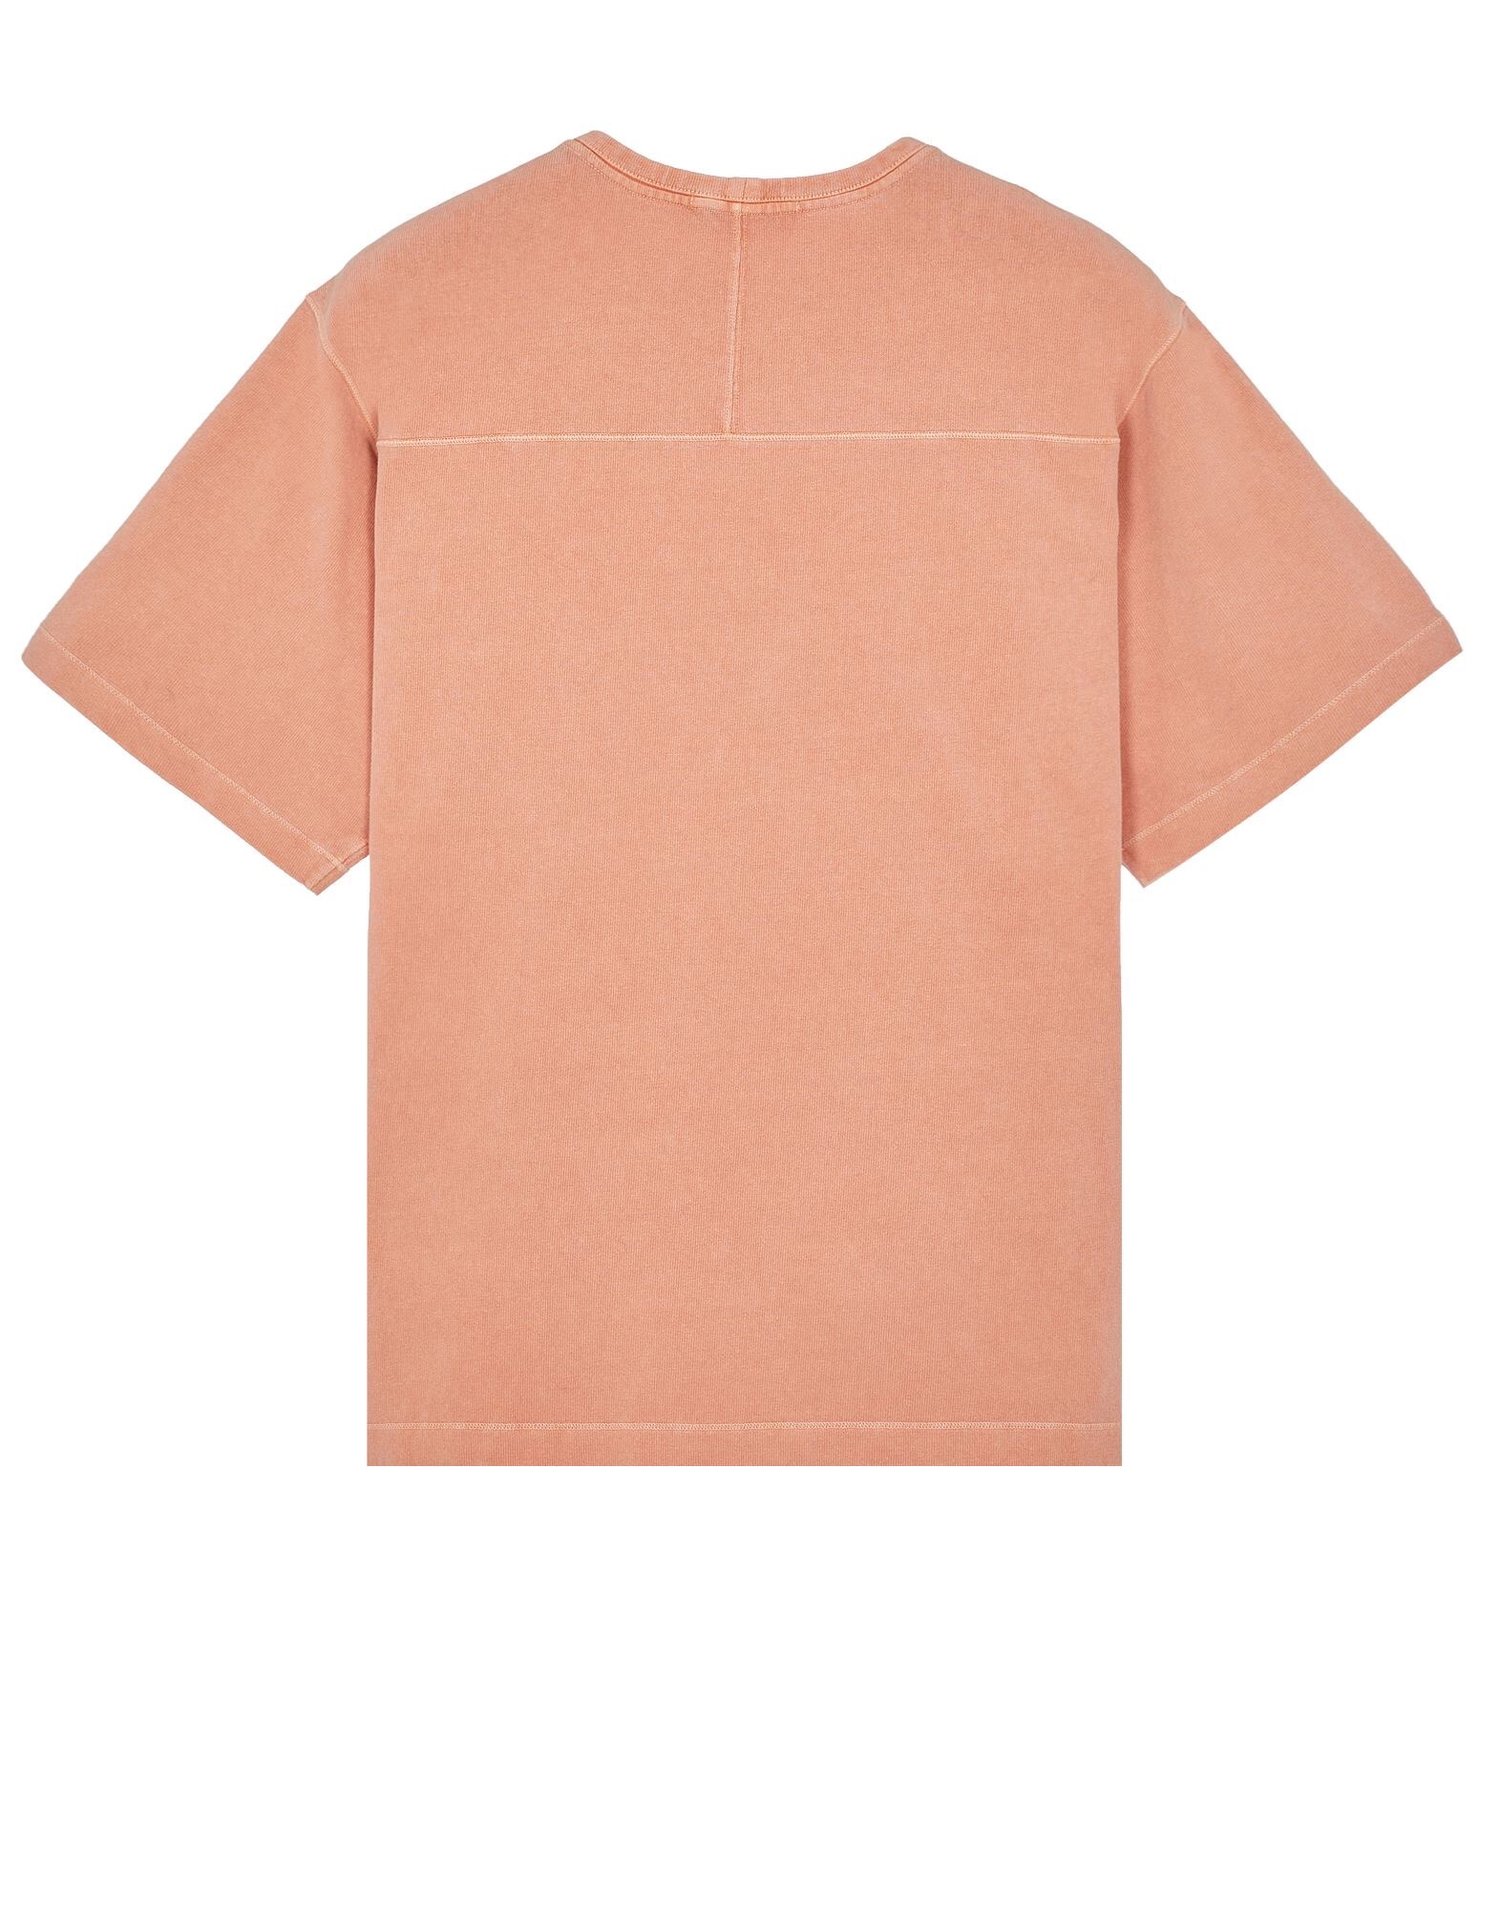 Image of STONE ISLAND 209T2 60% RECYCLED HEAVY COTTON JERSEY, TINTO TERRA